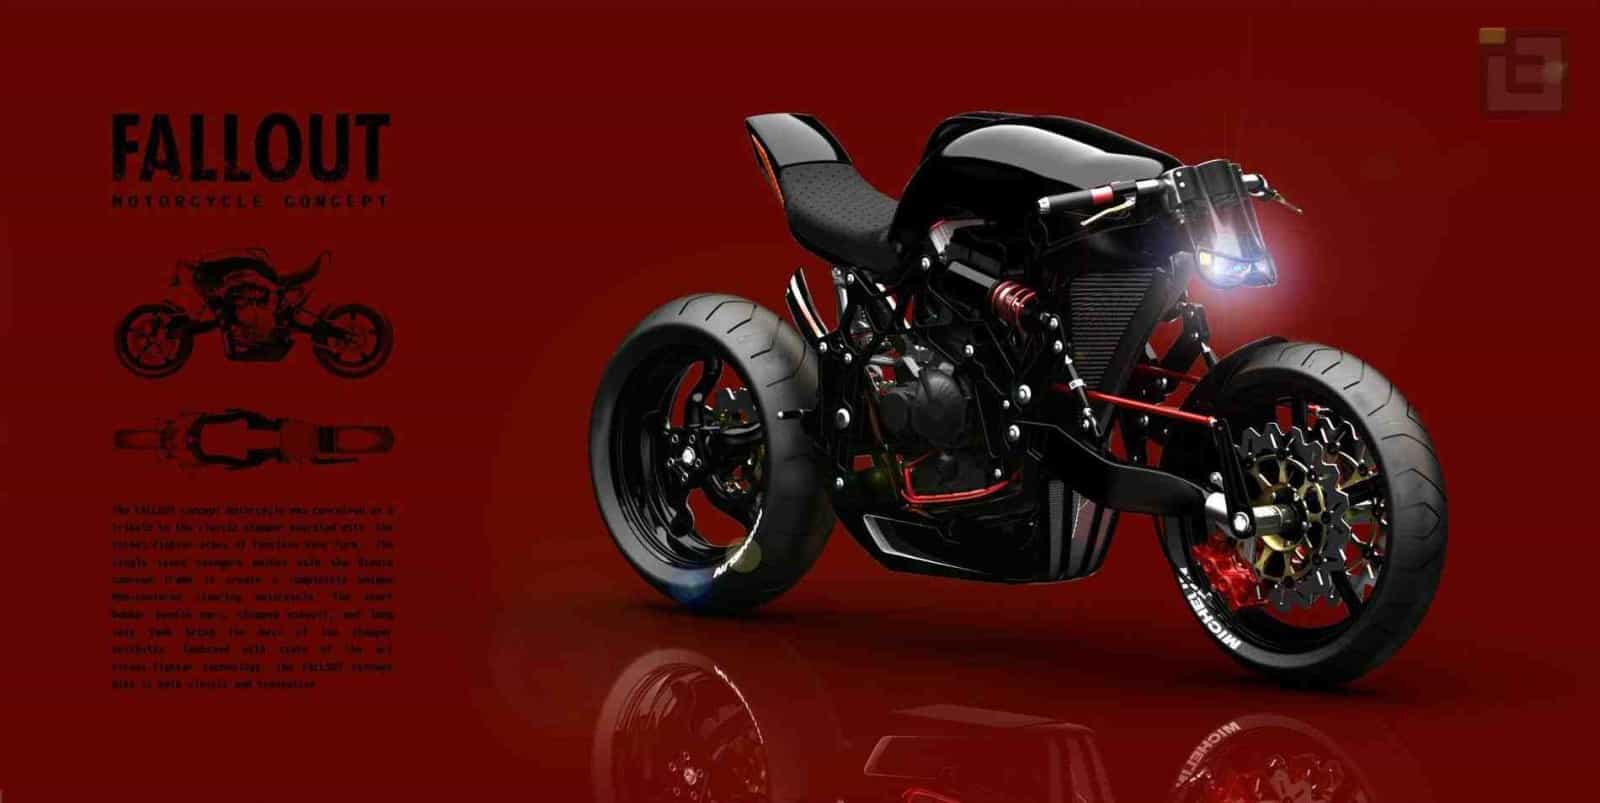 m take porsche motorcycle concept a look at this fantastic tesla model m bmw unleashes err electric cleantechnica bmw porsche motorcycle concept